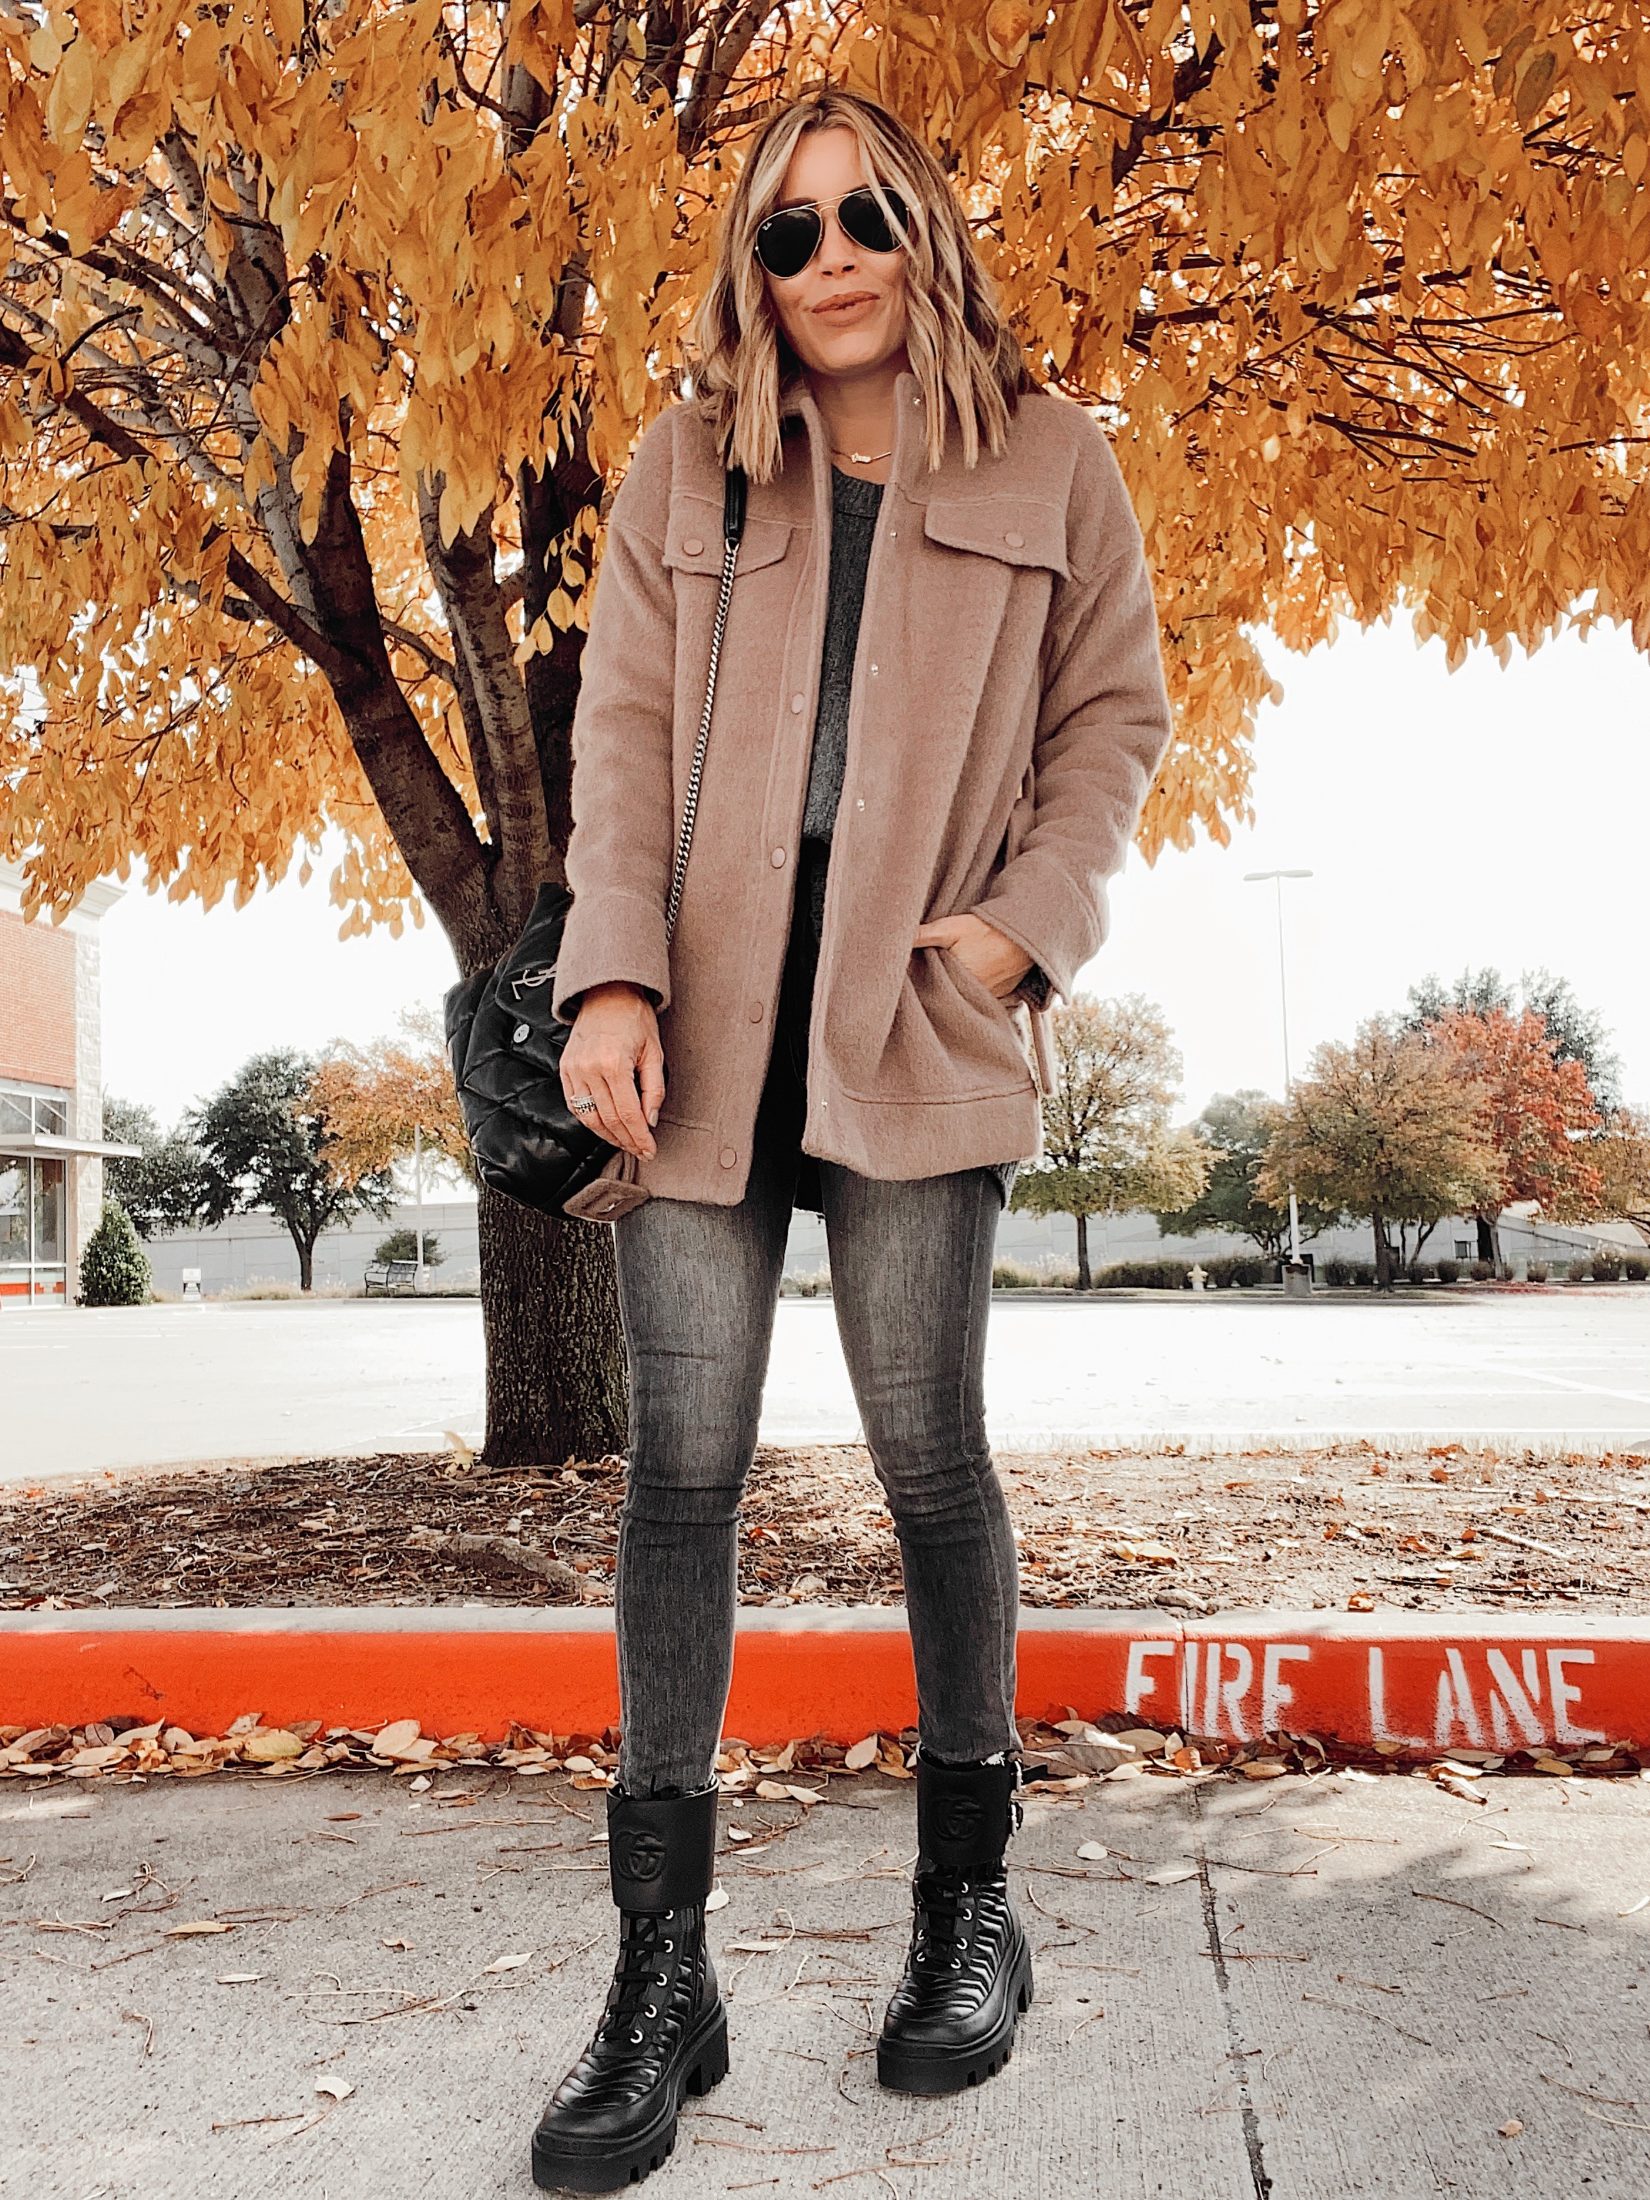 jaime shrayber wearing camel shirt jacket and black combat boots outfit